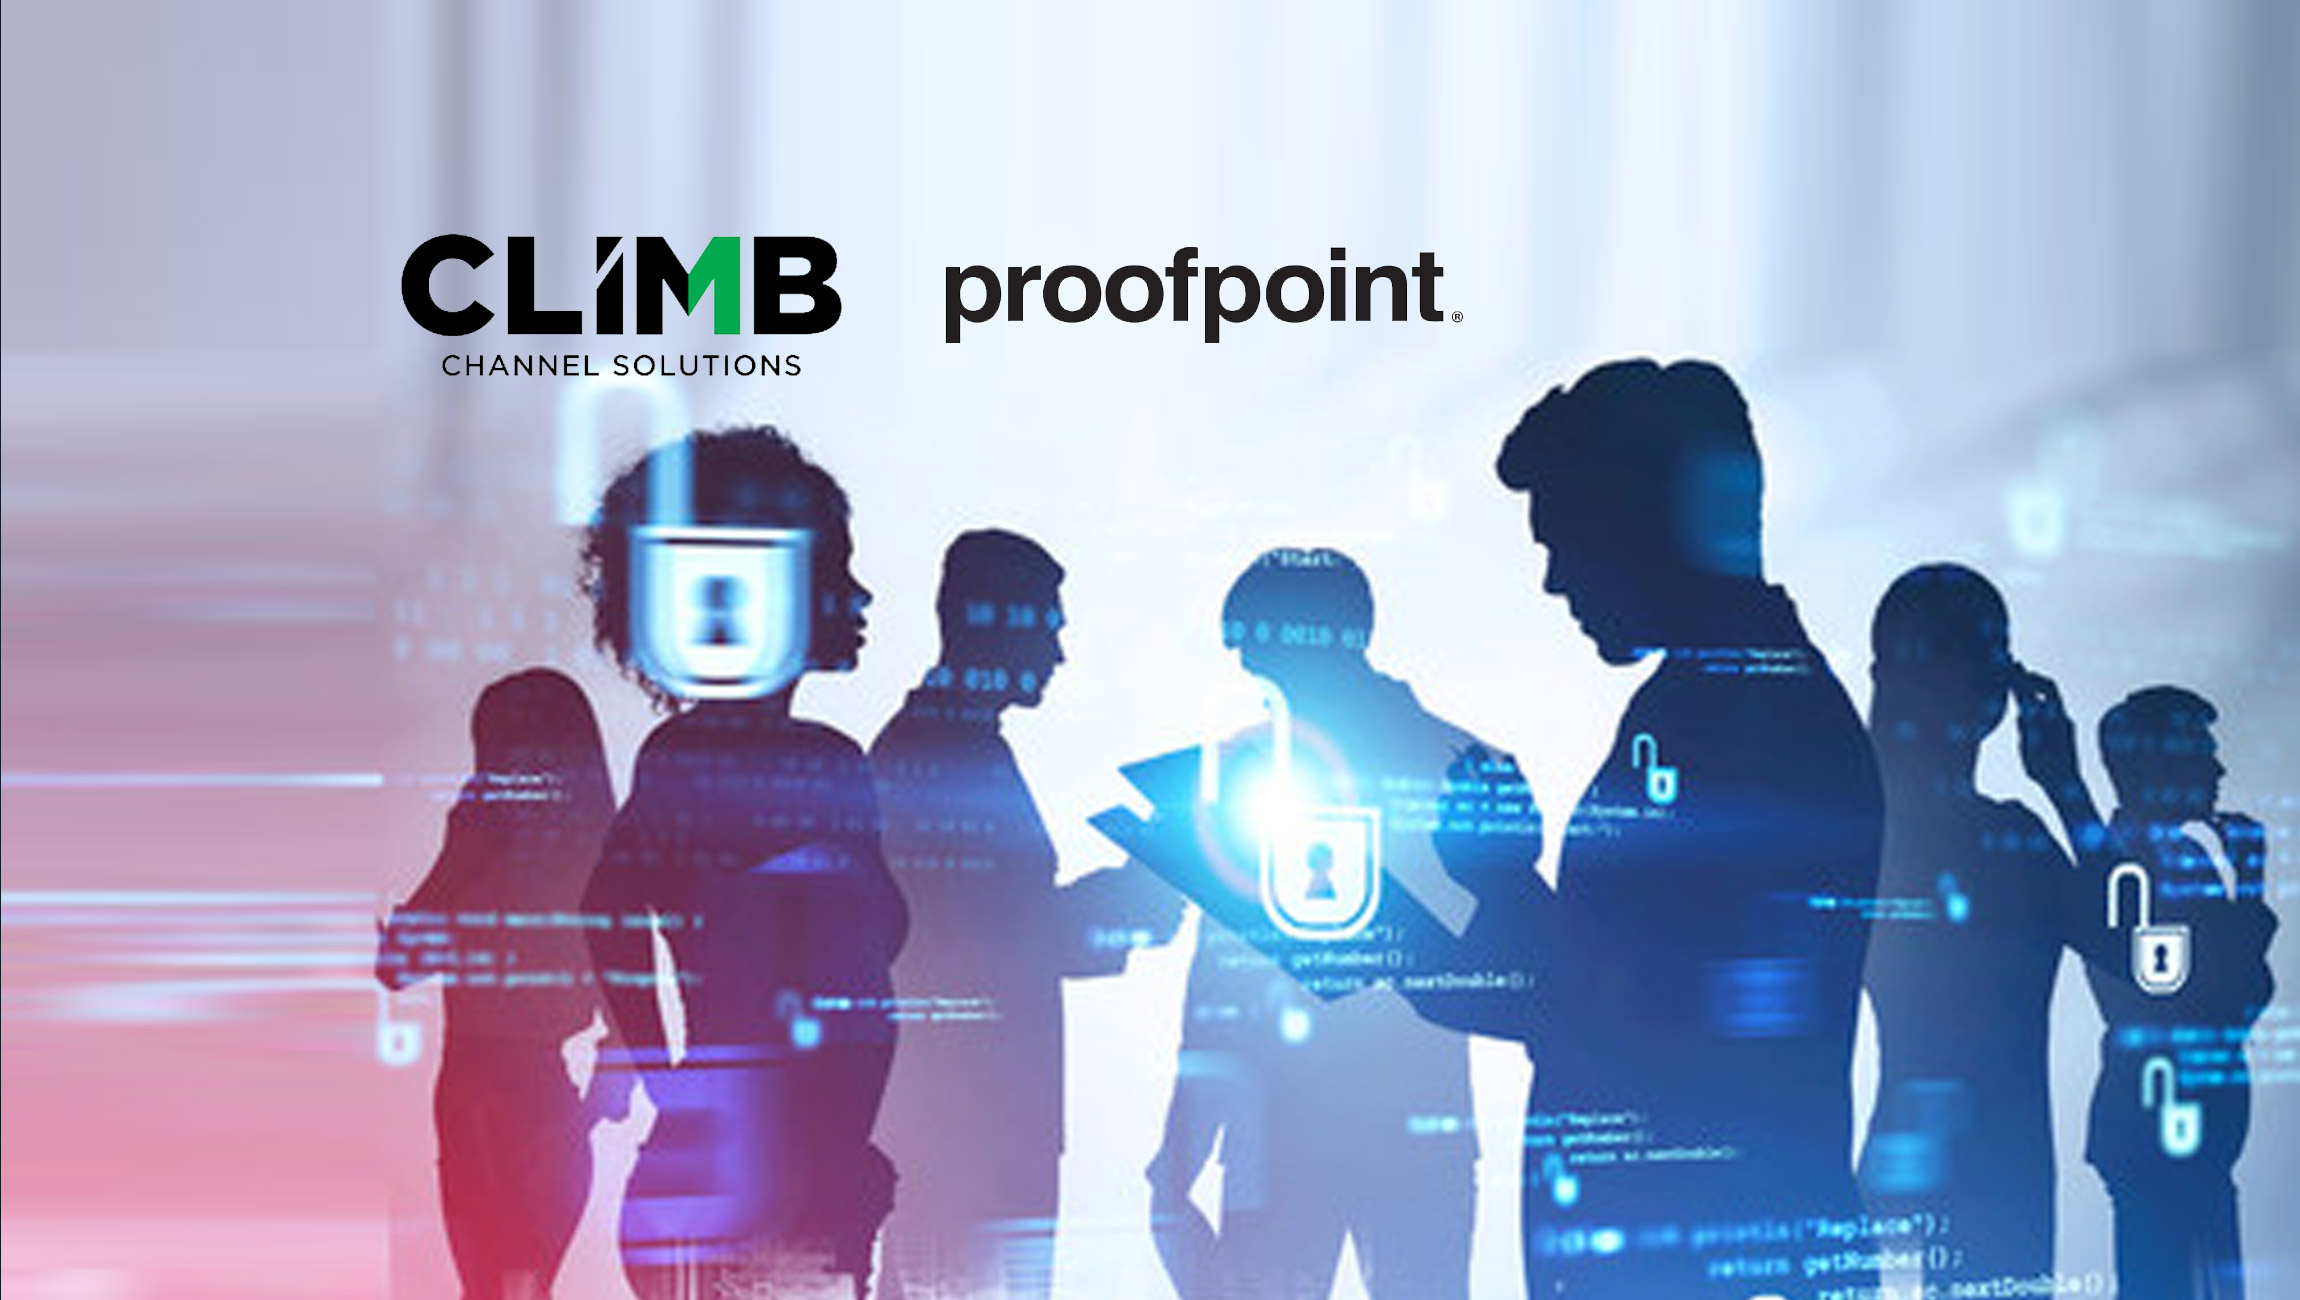 Climb Channel Solutions Teams Up with Proofpoint to Bring People-Centric Cybersecurity Solutions to the Channel